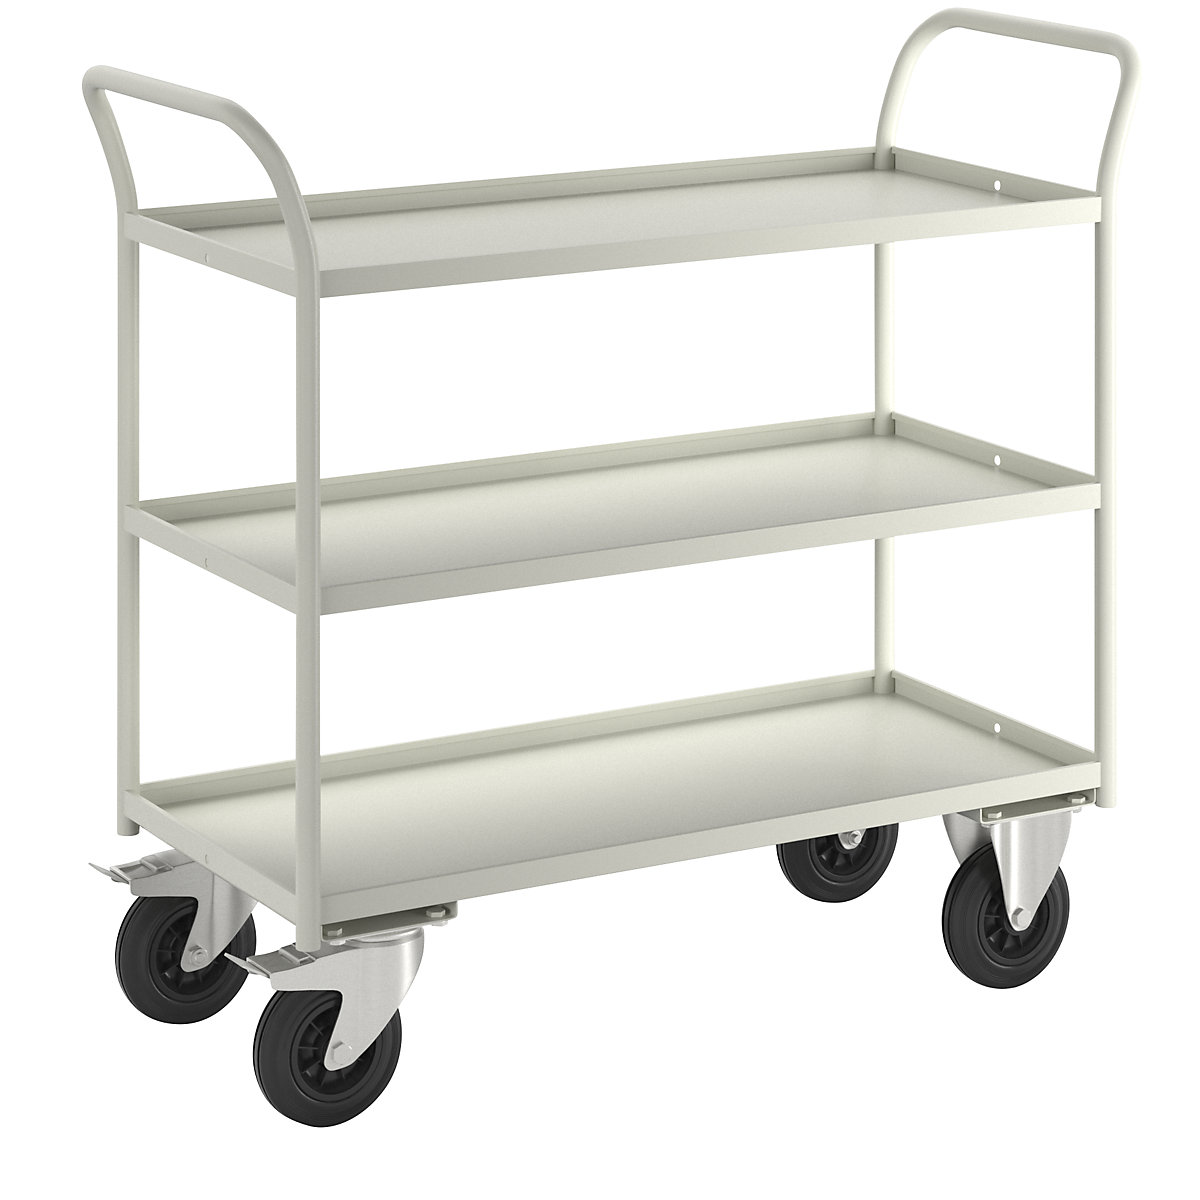 KM41 table trolley – Kongamek, 3 shelves with raised edges, LxWxH 1080 x 450 x 1000 mm, white, 2 swivel castors with stops, 2 fixed castors-2